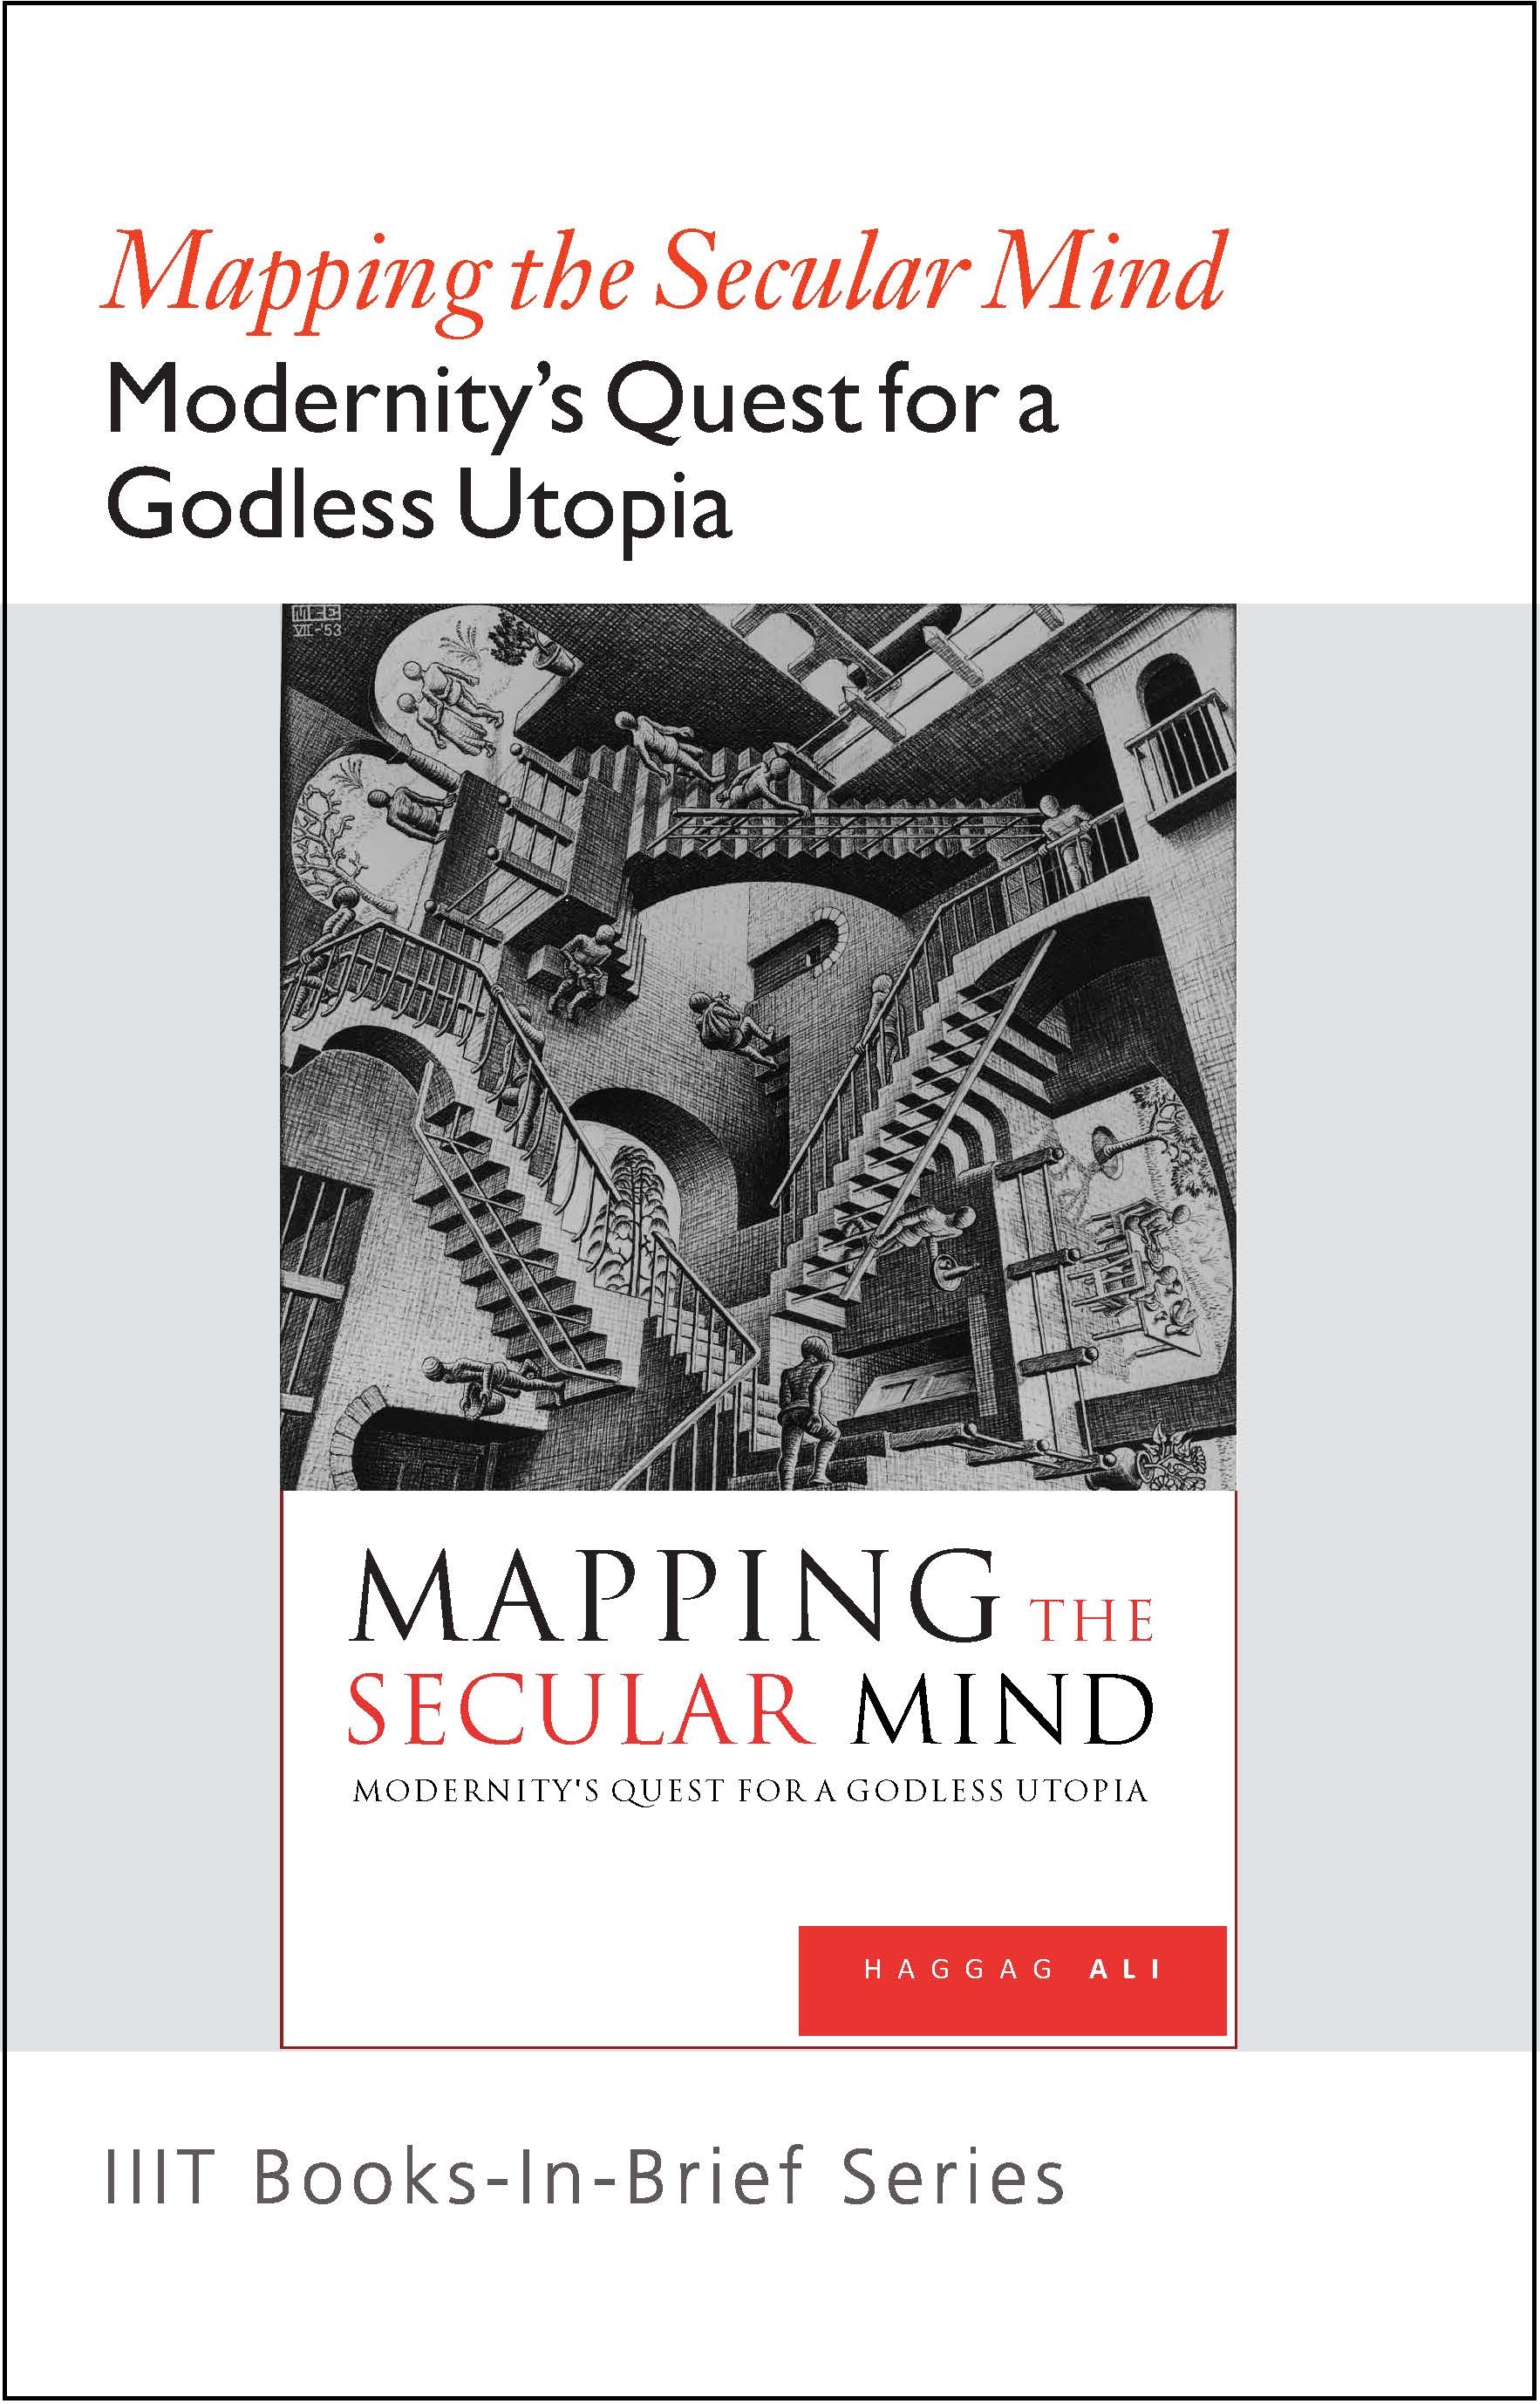 Books-in-Brief: Mapping the Secular Mind: Modernity's Quest for a Godless Utopia